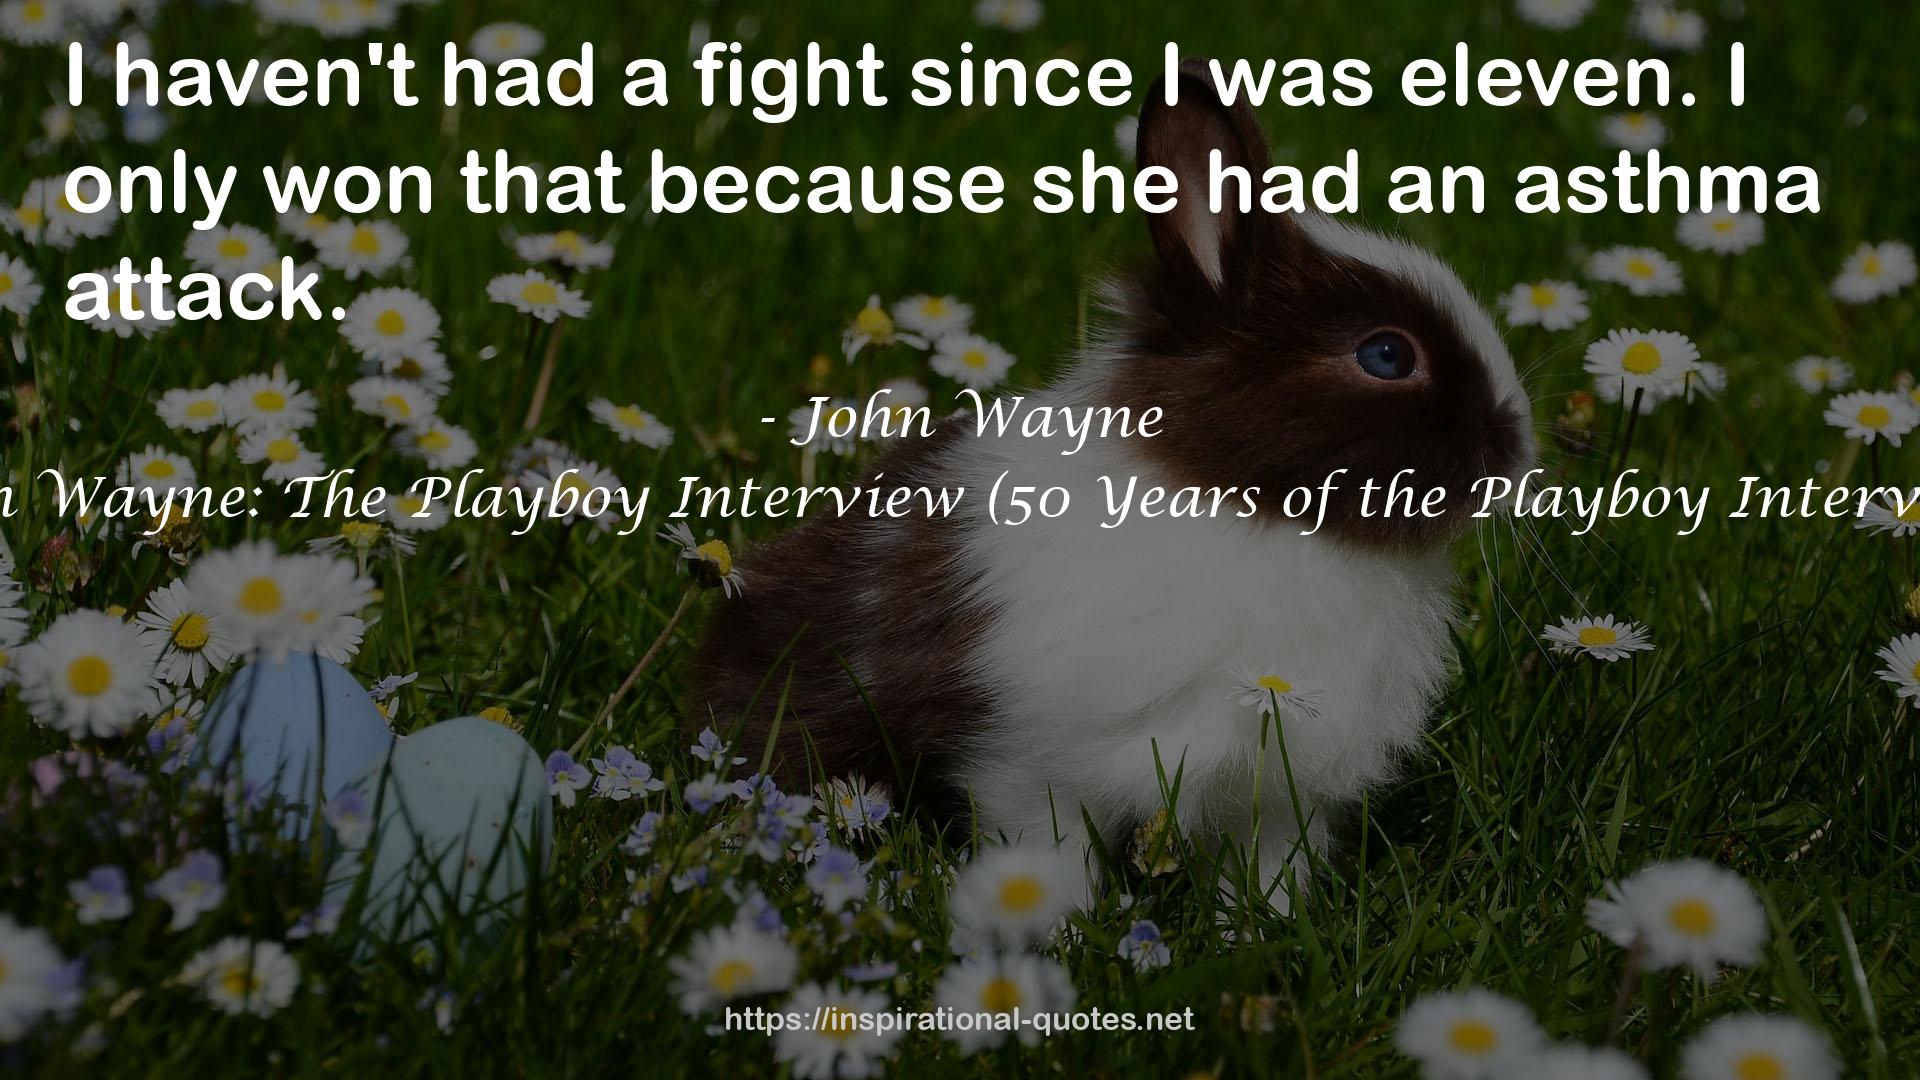 John Wayne: The Playboy Interview (50 Years of the Playboy Interview) QUOTES